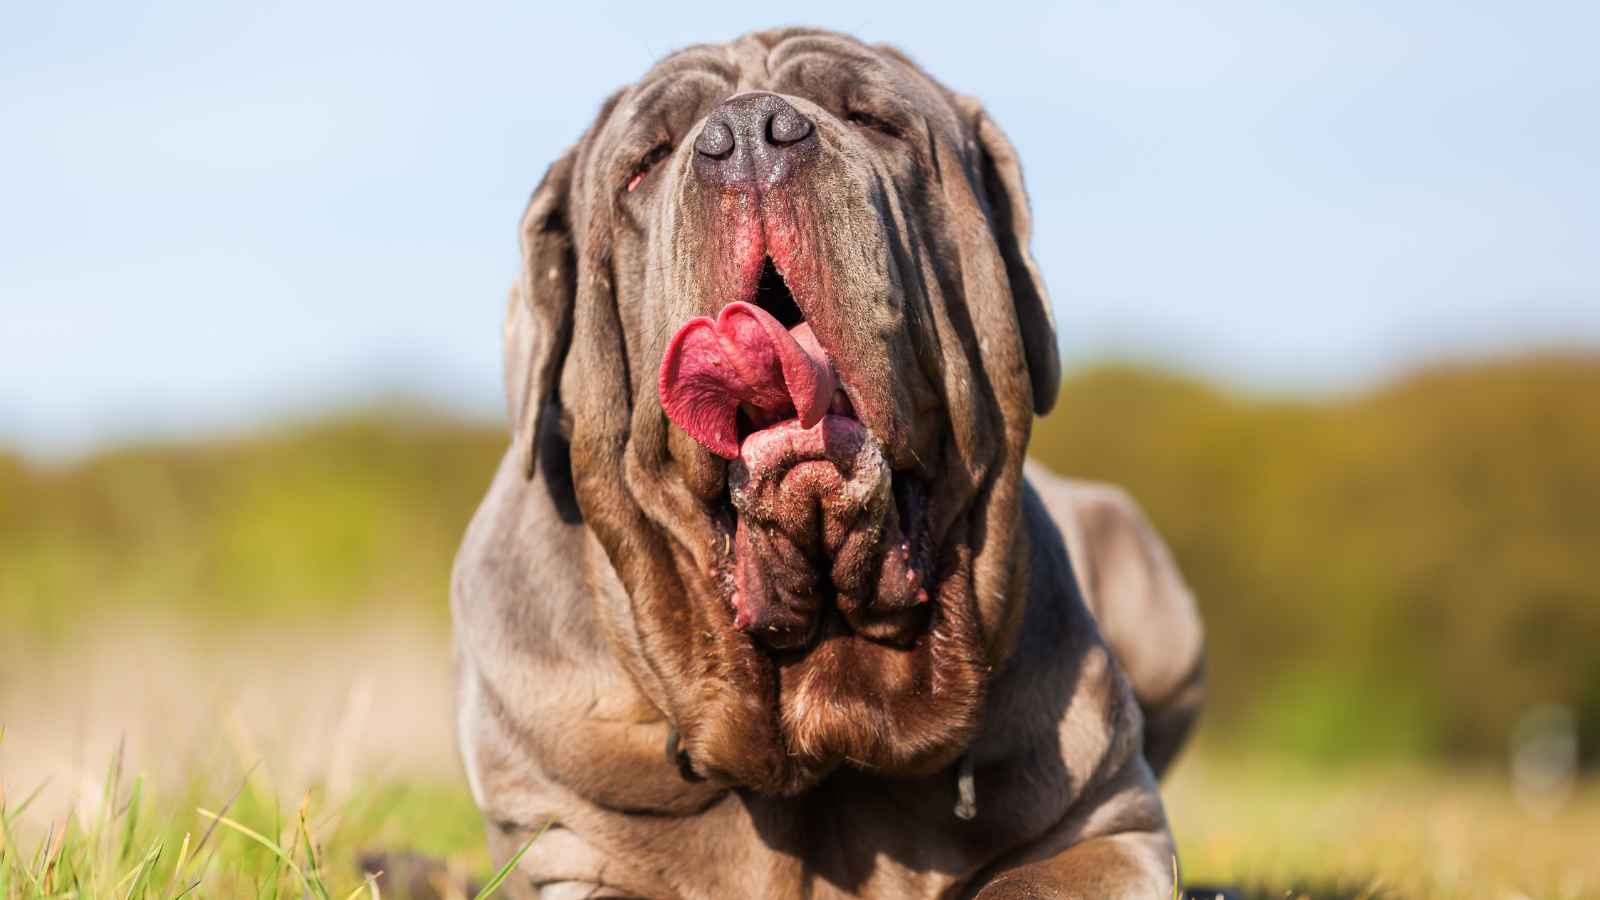 The Top 20 Dog Breeds That Will Strike Fear into Your Bones